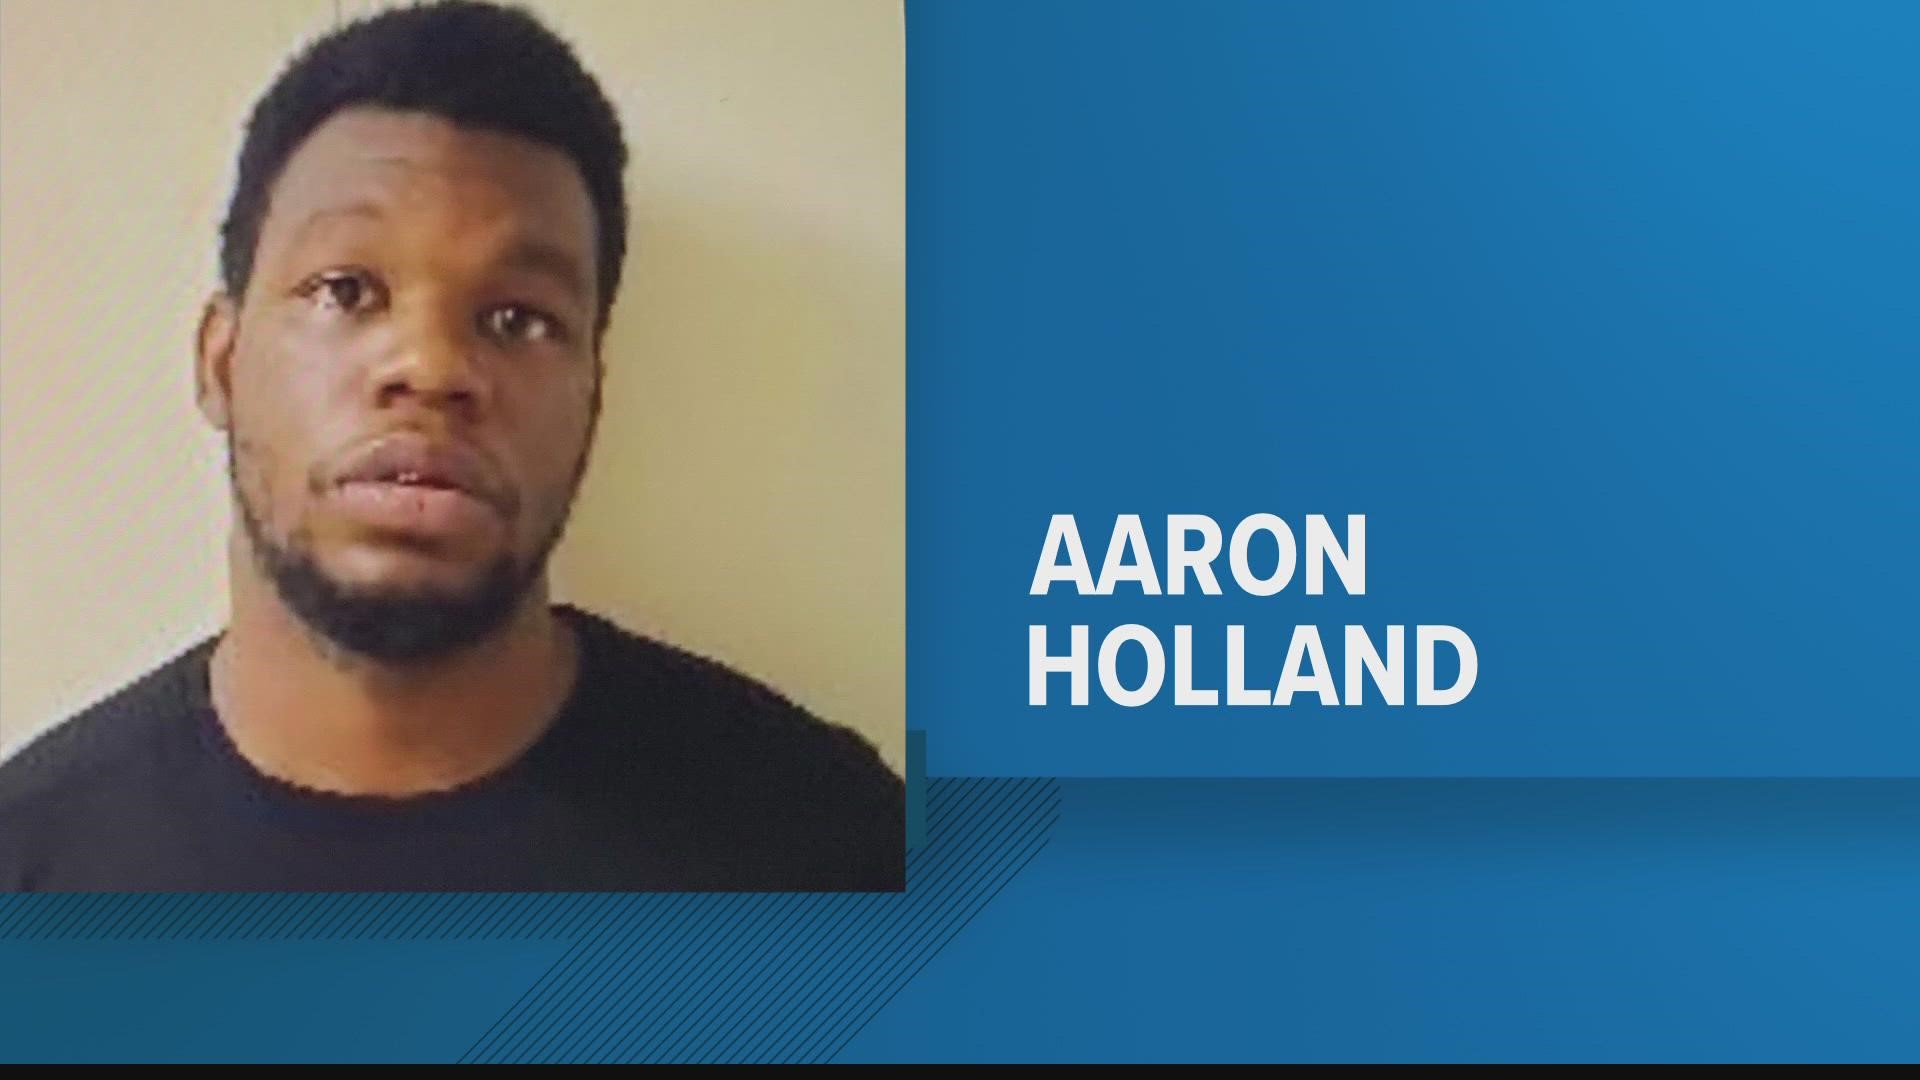 Aaron Holland was wanted in connection to the June 17 shooting of Landan Jenkins, who is still in critical condition following the shooting.